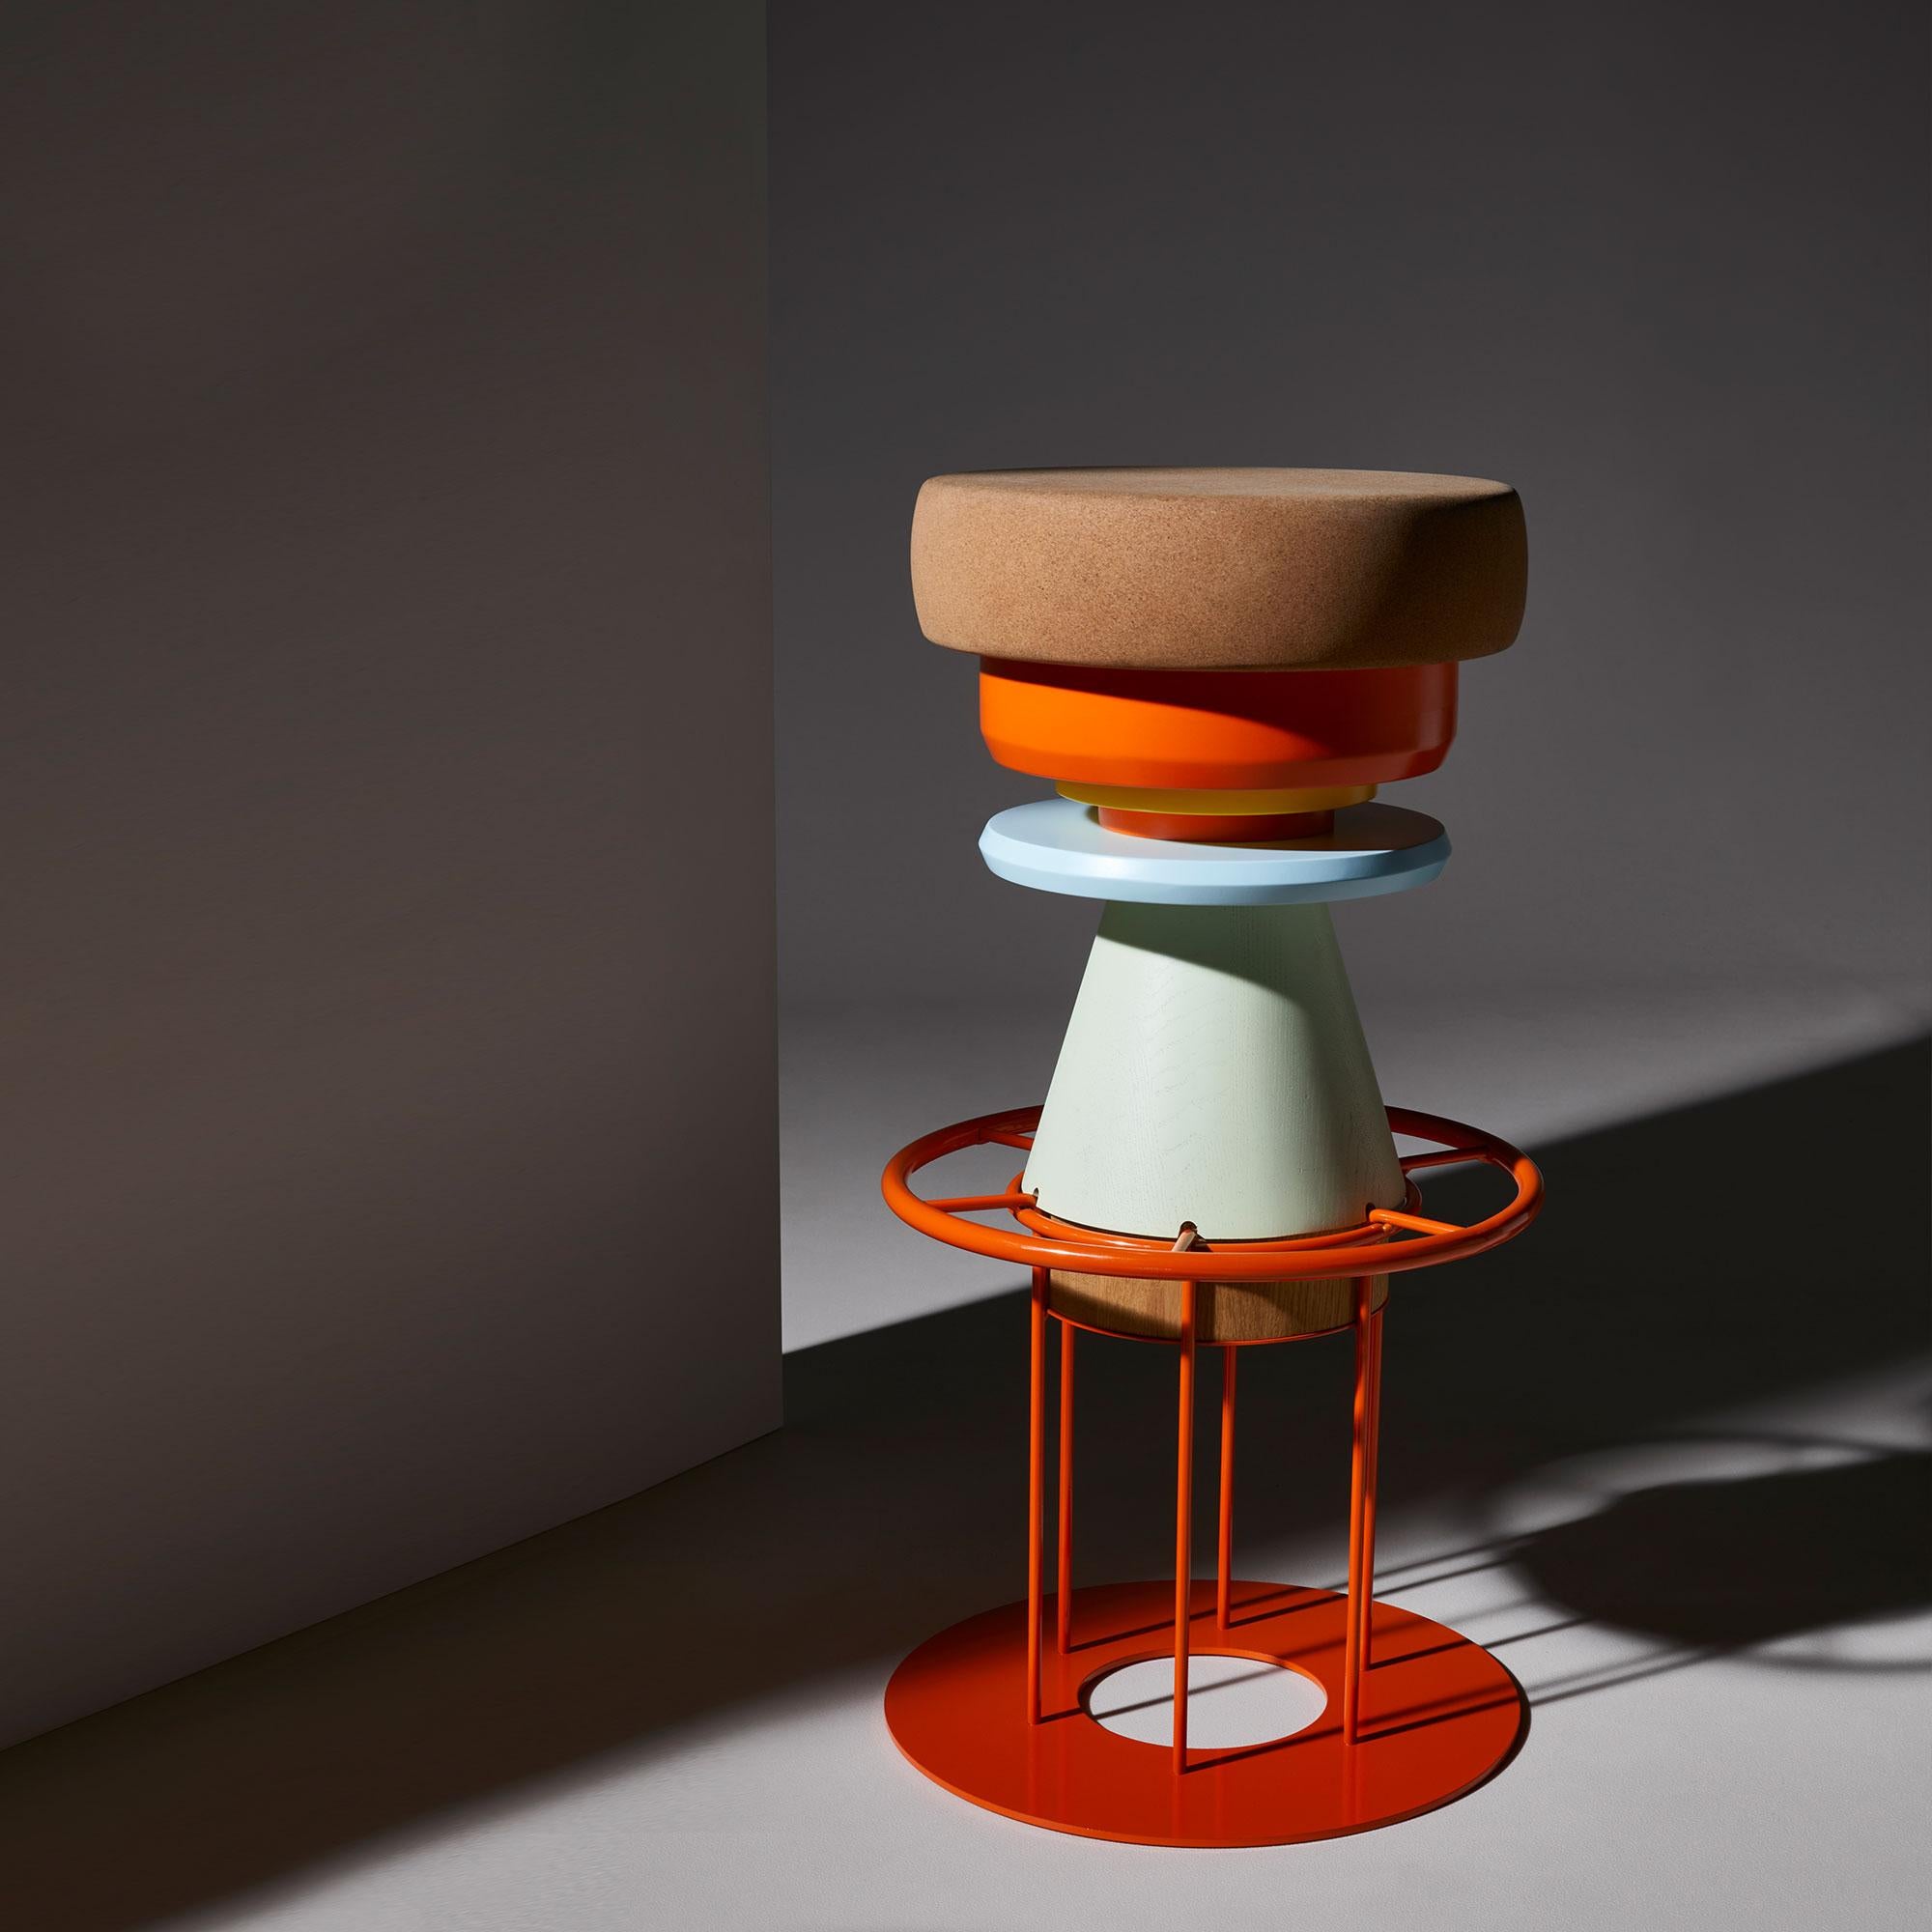 High colorful tembo stool - Note Design Studio
Dimensions: D 36 x H 76 cm
Materials: Lacquered steel structure, solid wood (beech) and lacquered MDF, natural cork base.
Available in black and 3 sizes: H46, H64, H76 cm.

Tembo is a stool made of